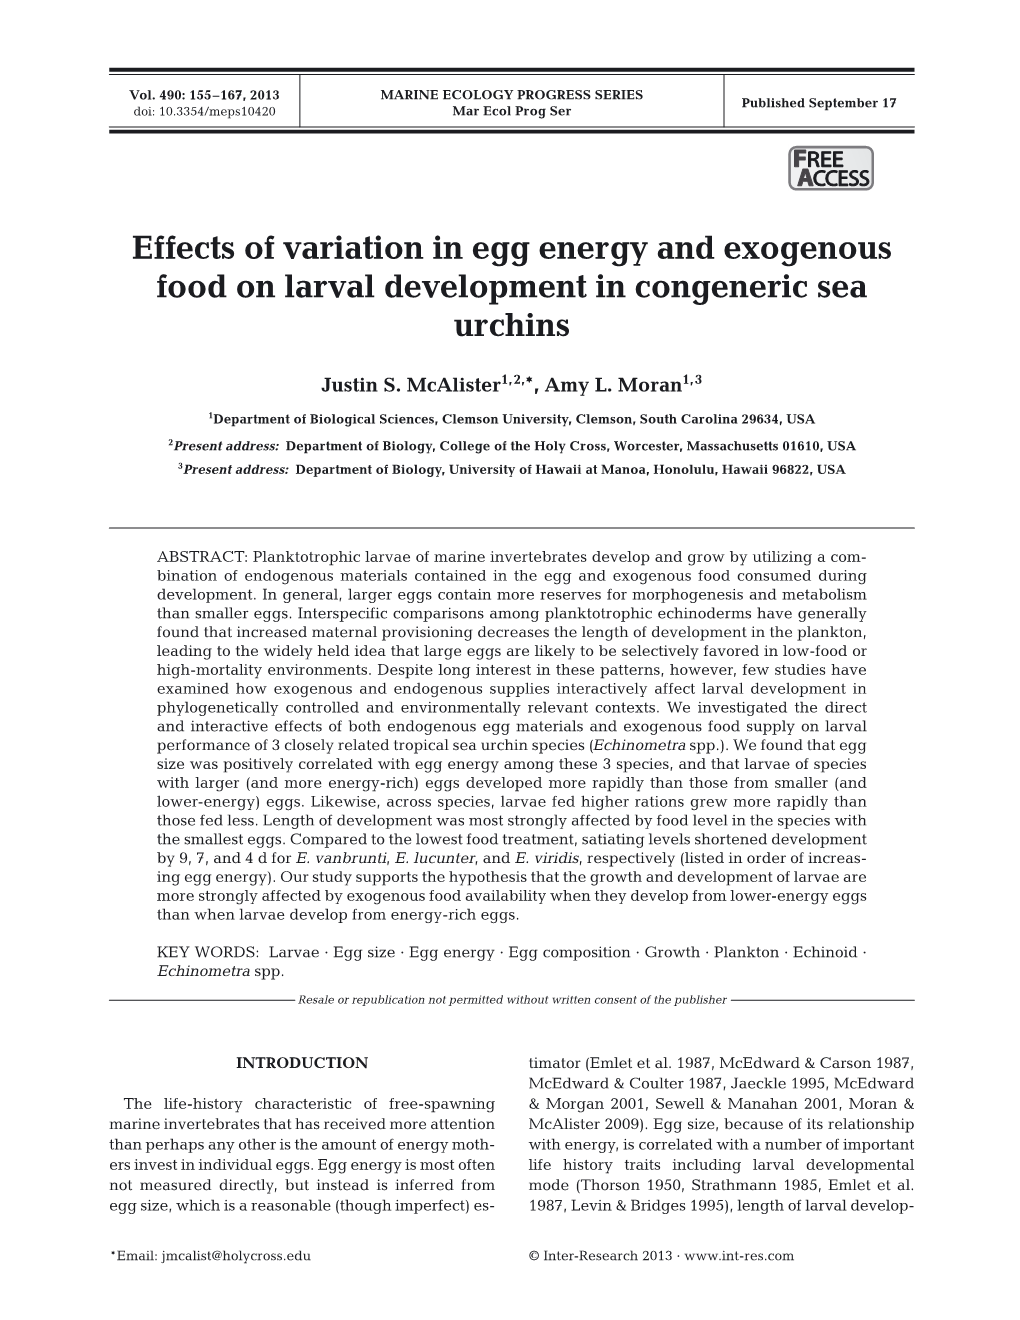 Effects of Variation in Egg Energy and Exogenous Food on Larval Development in Congeneric Sea Urchins